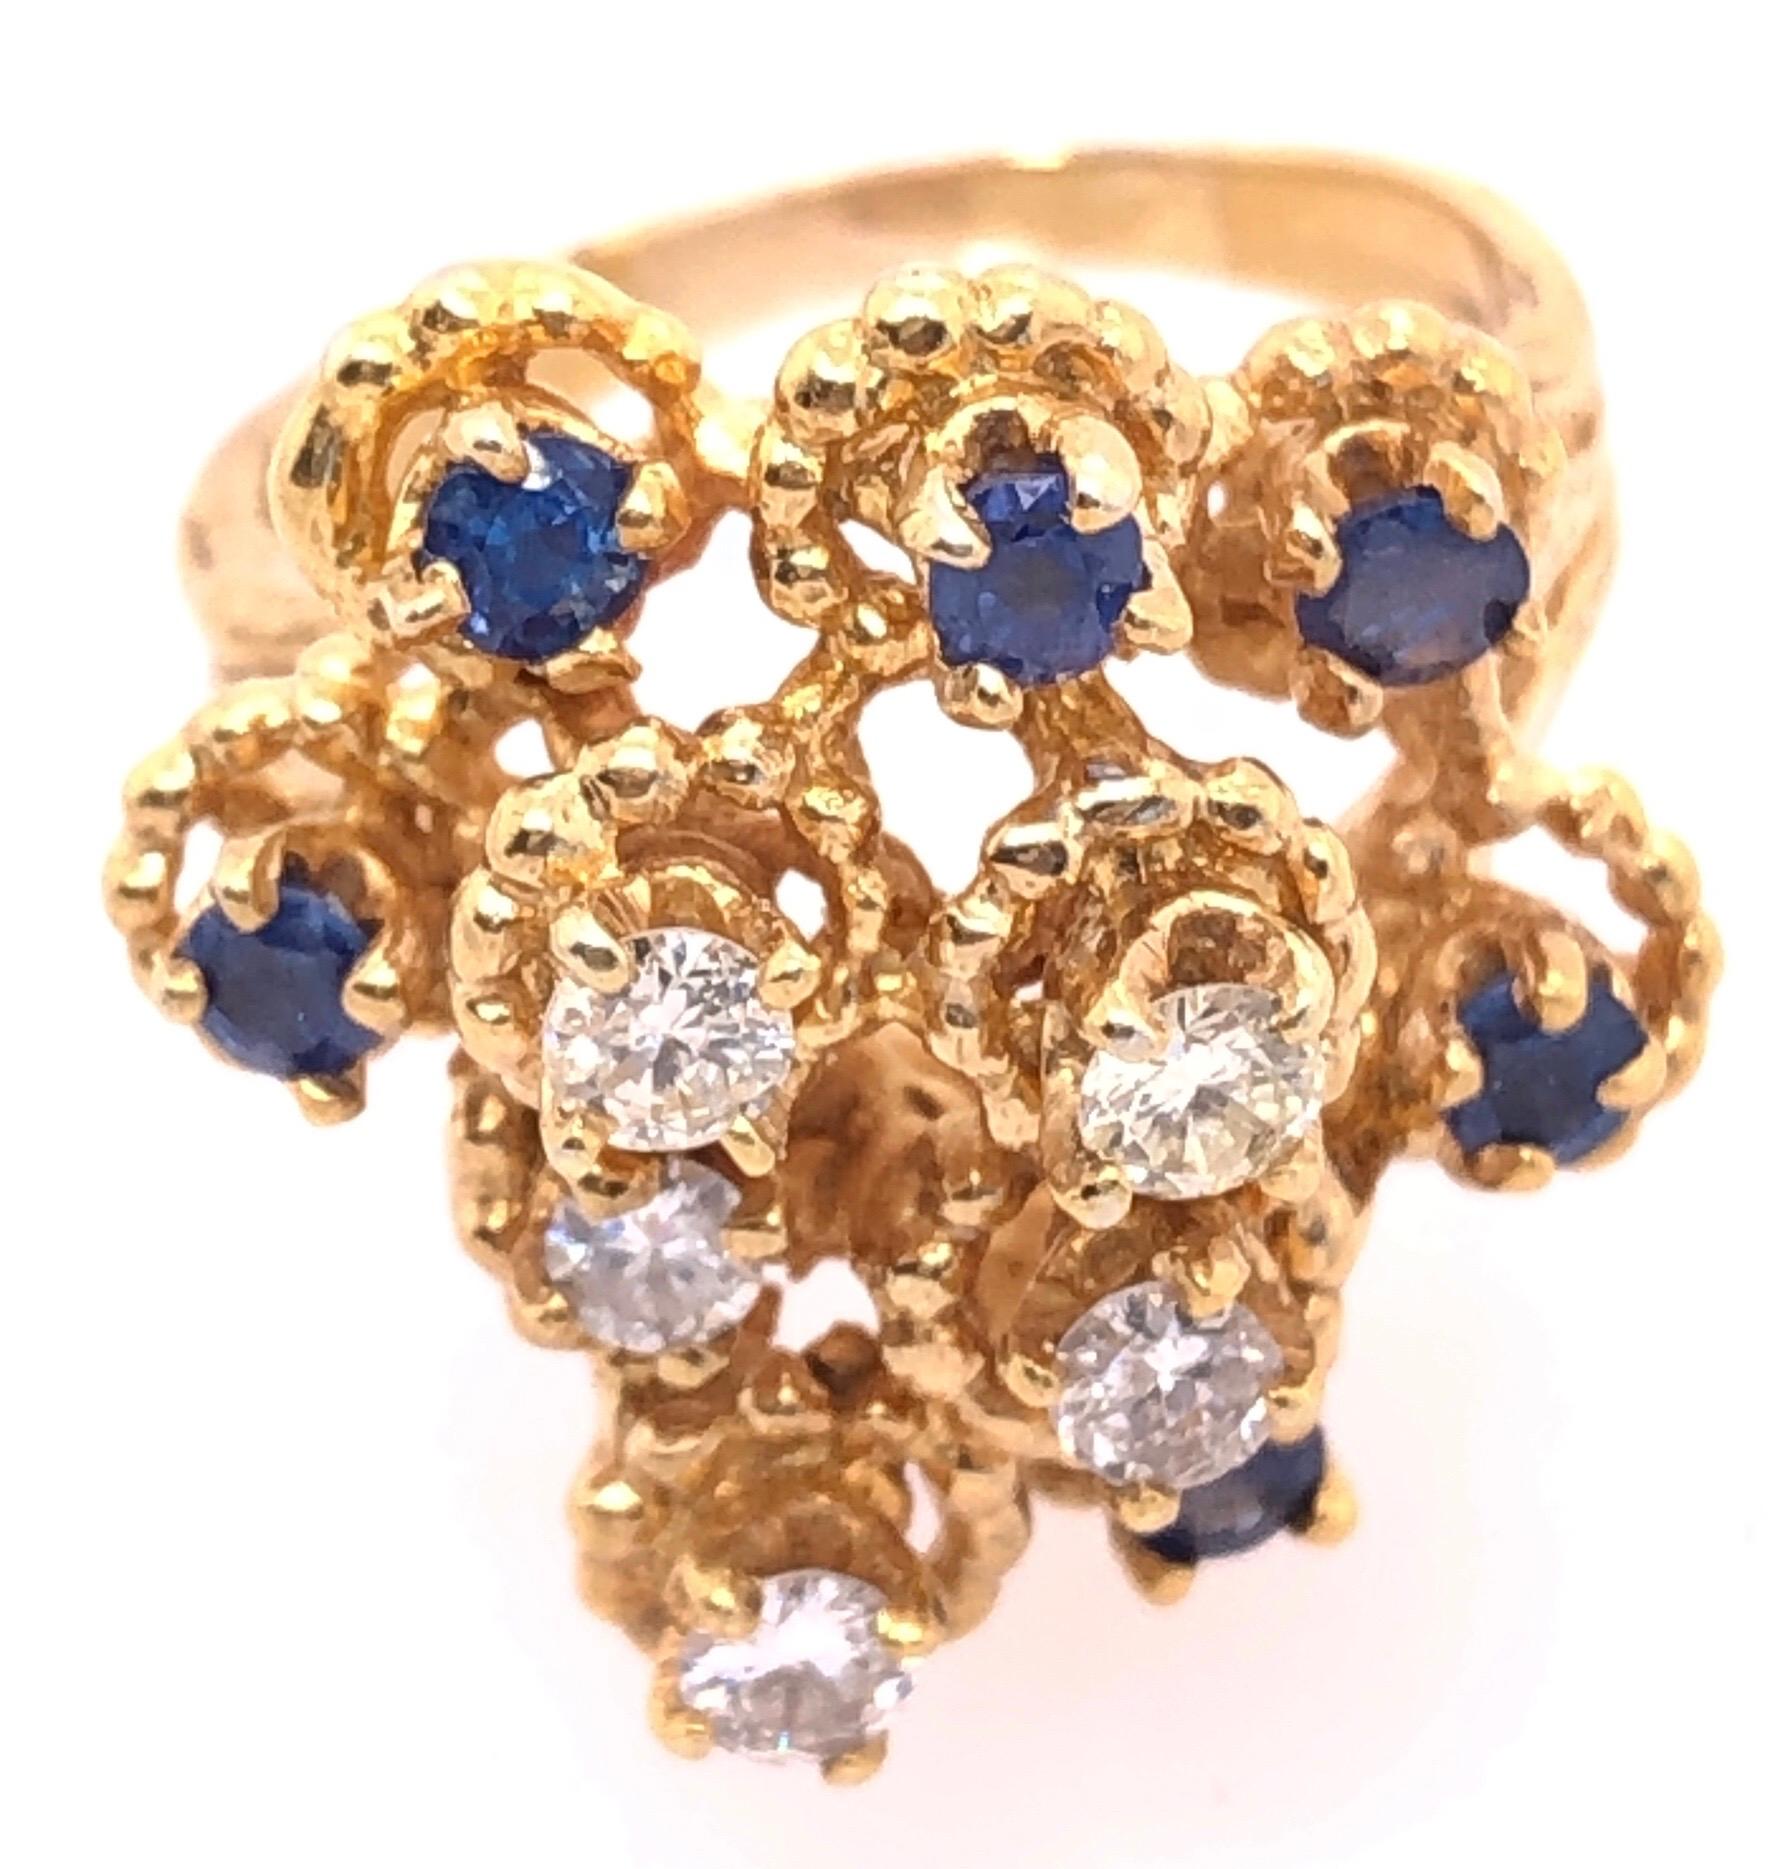 14 Karat Yellow Gold Sapphire And Diamond Cluster Ring Size 7.
1.00 total diamond weight
0.18 total sapphire weight
9.25 grams total ring weight